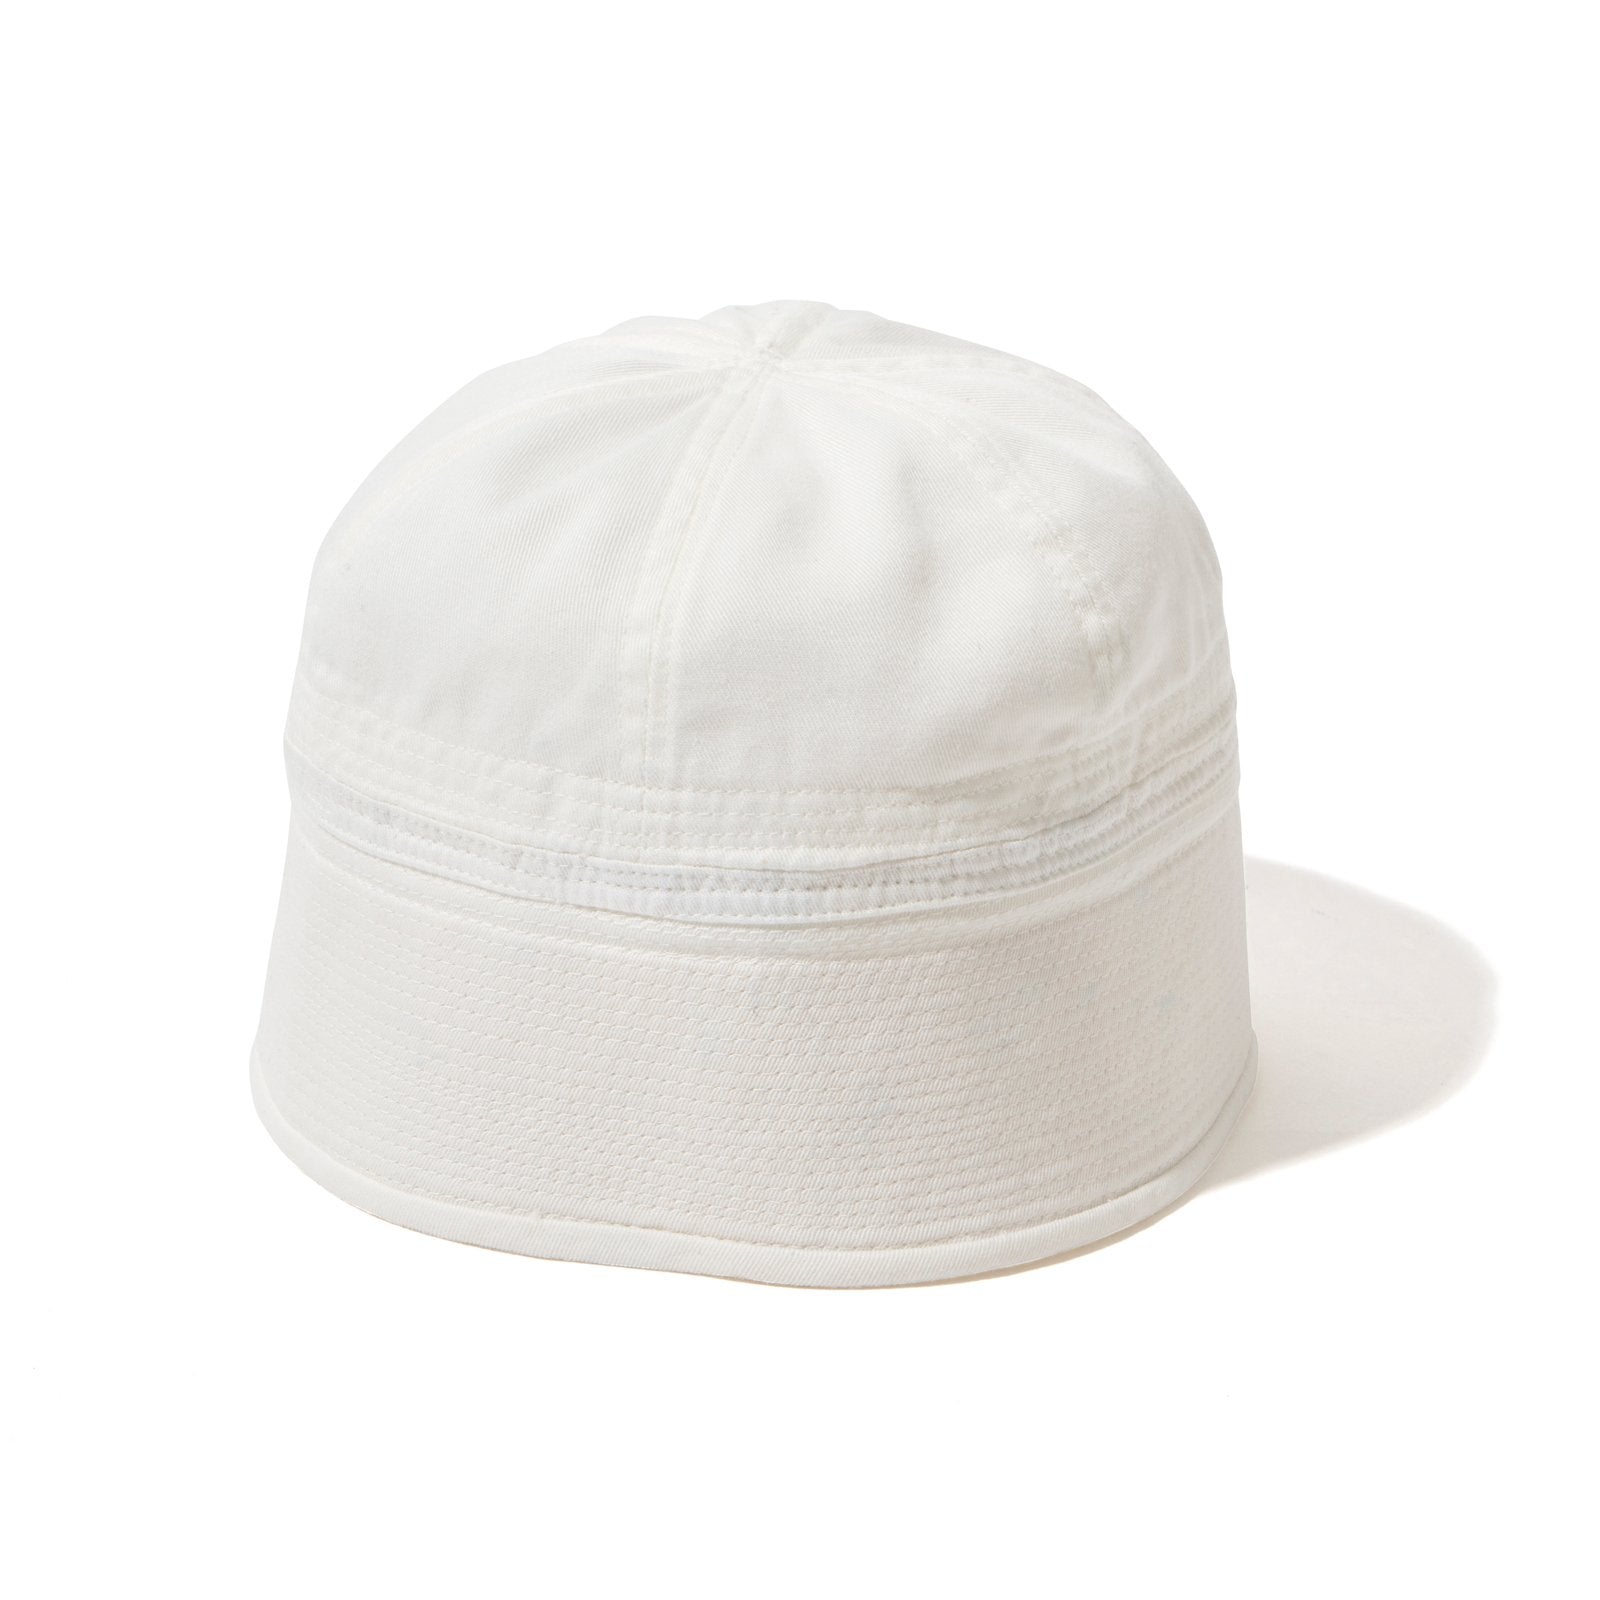 USN WHITE SERVICE HAT – The Real McCoy's